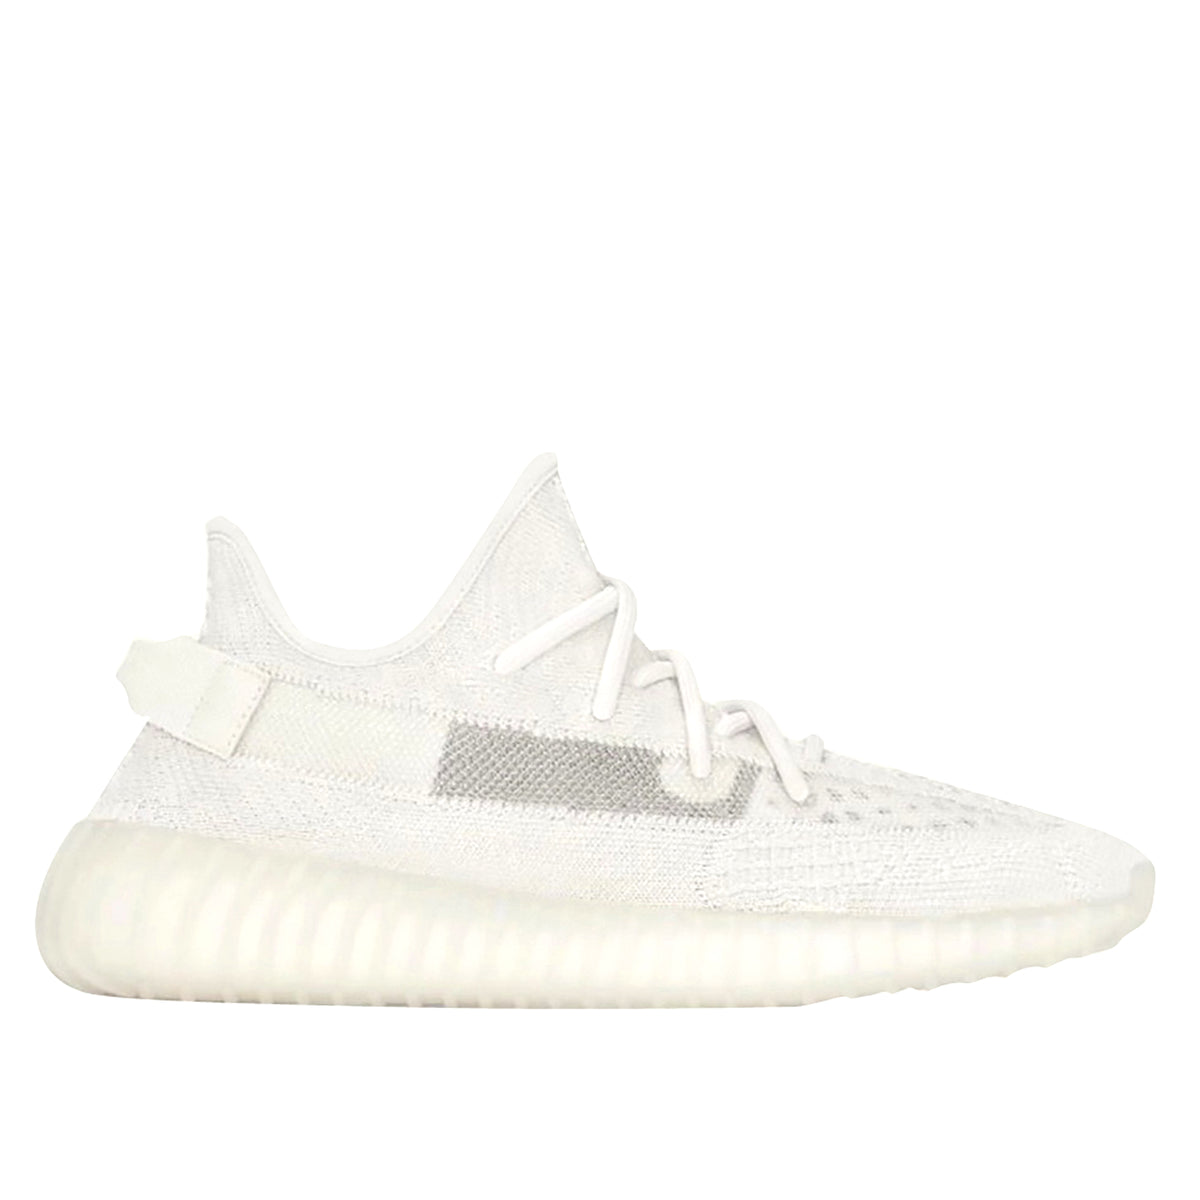 Yeezy Boost 350 V2 "Bone" Sneakers - SIZE Boutique